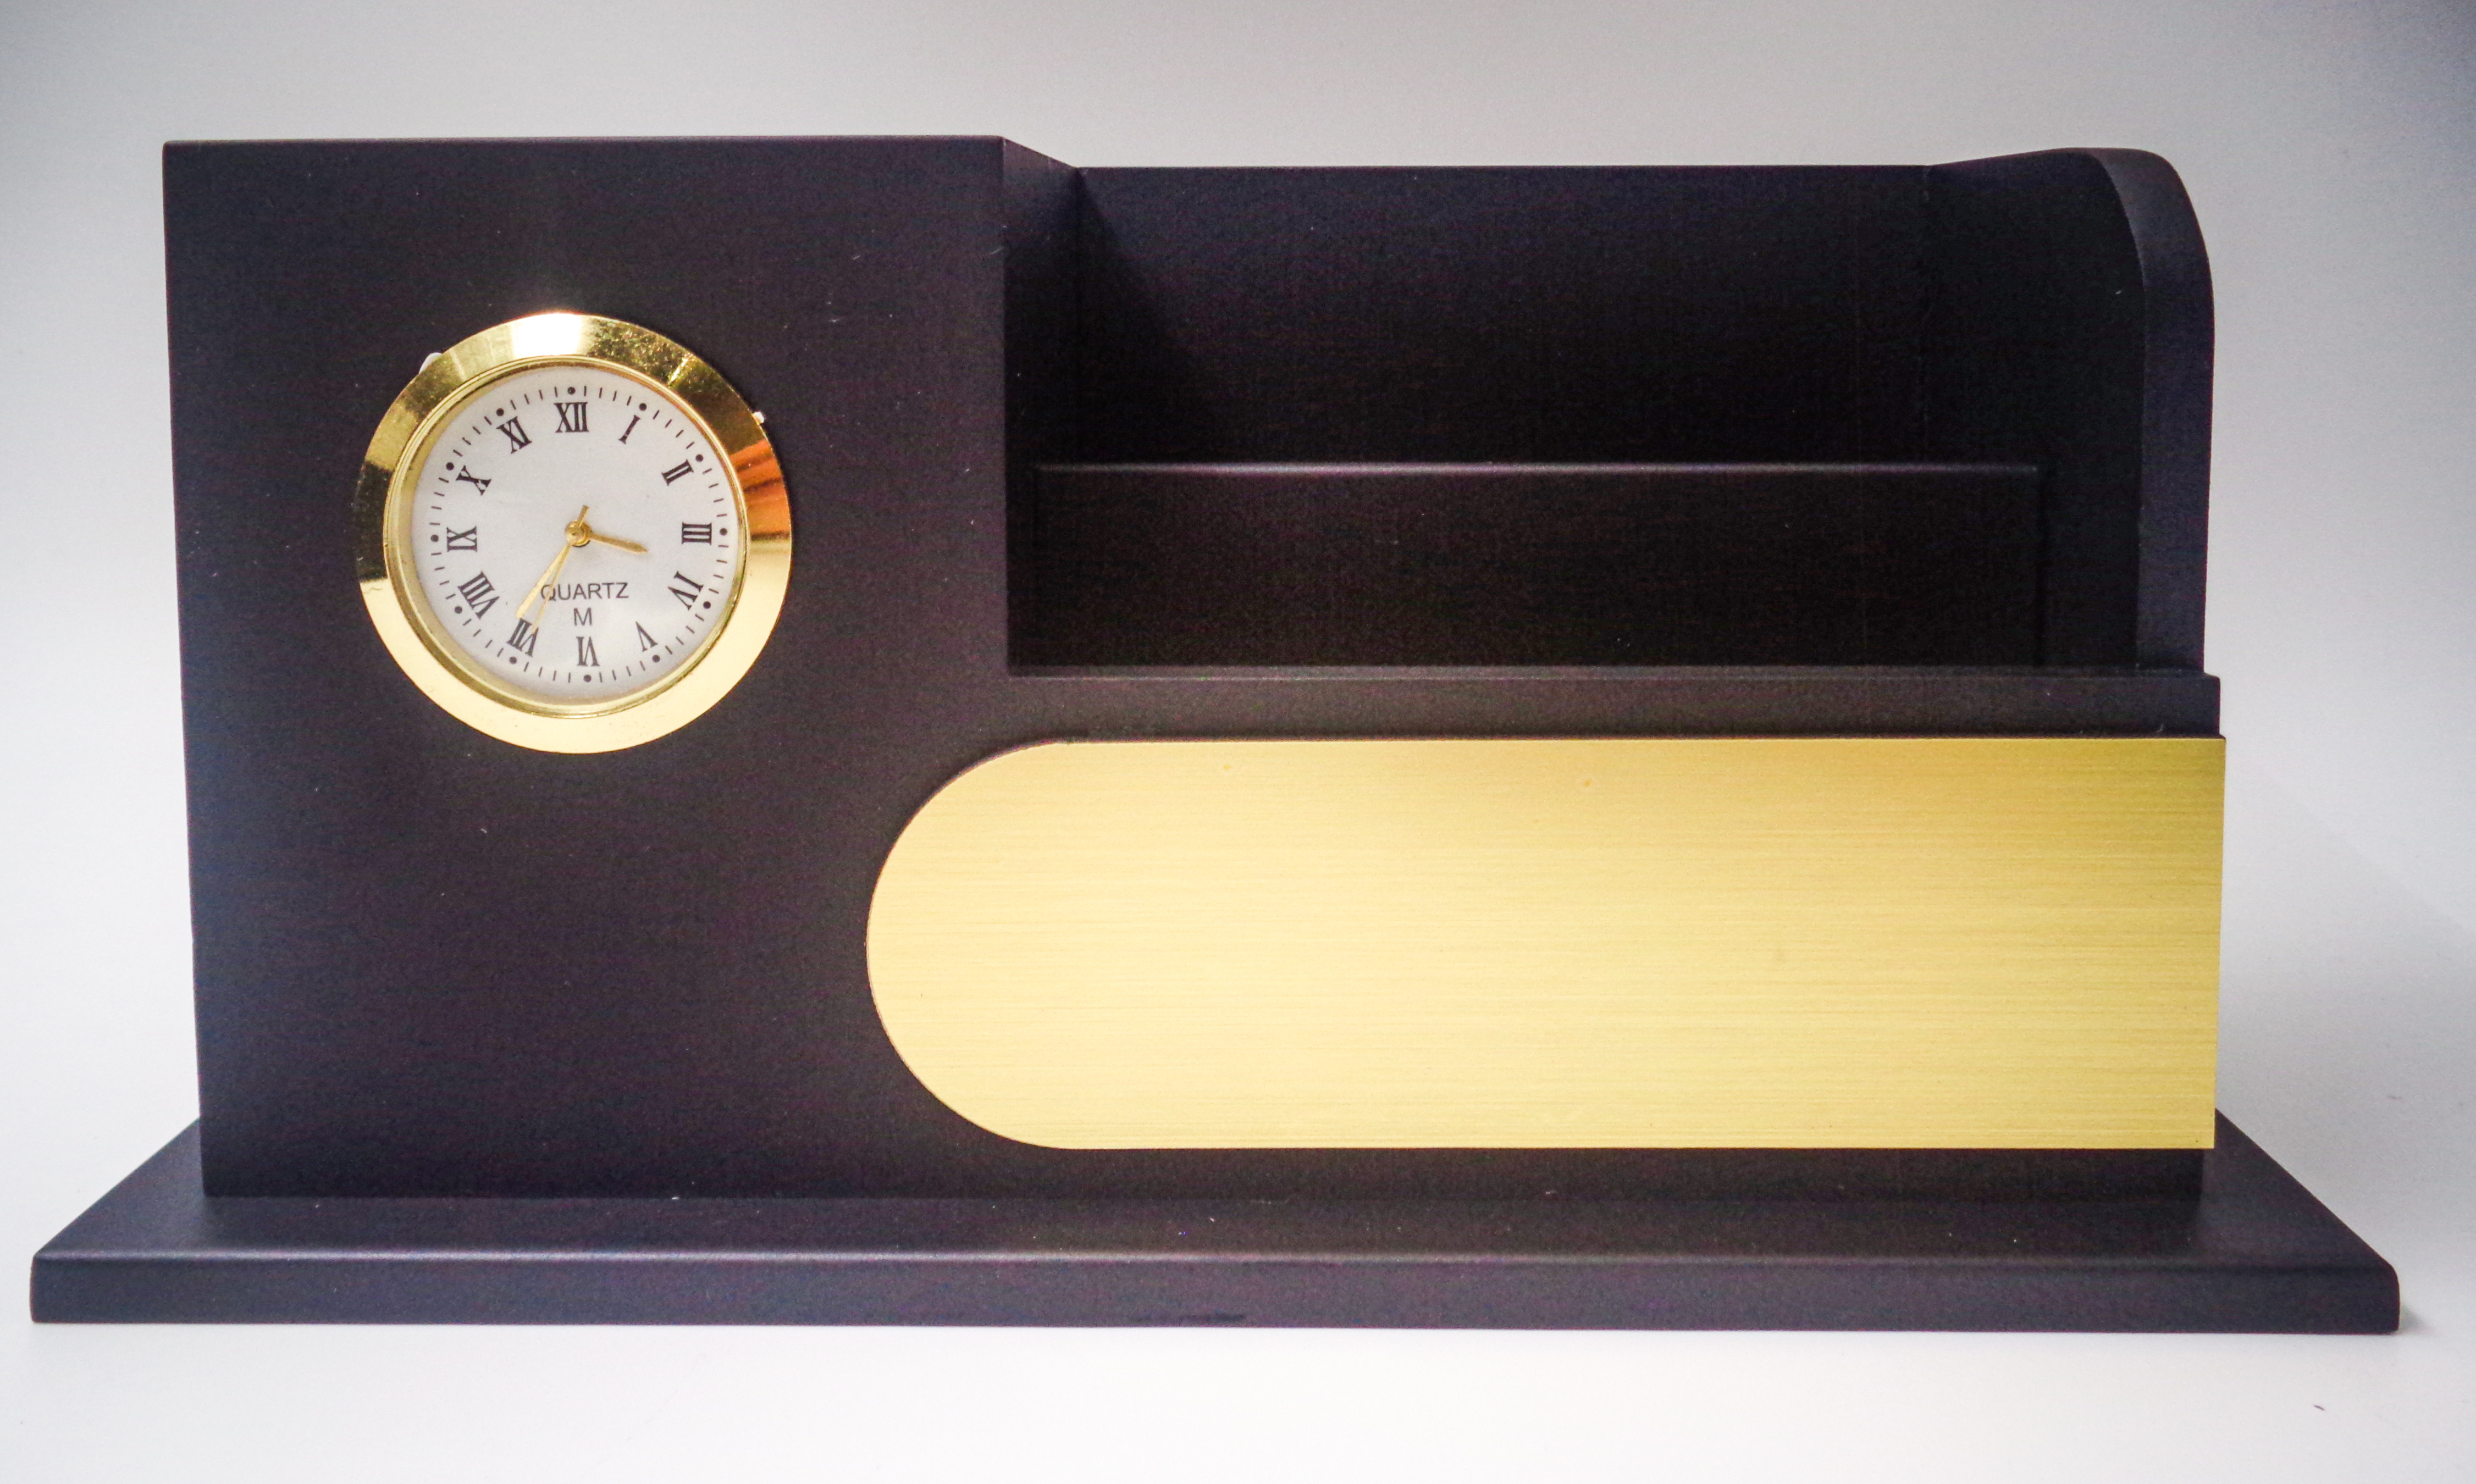 Mdf Customized Pen Stand And Mobile Holder With Clock   SKU 96865